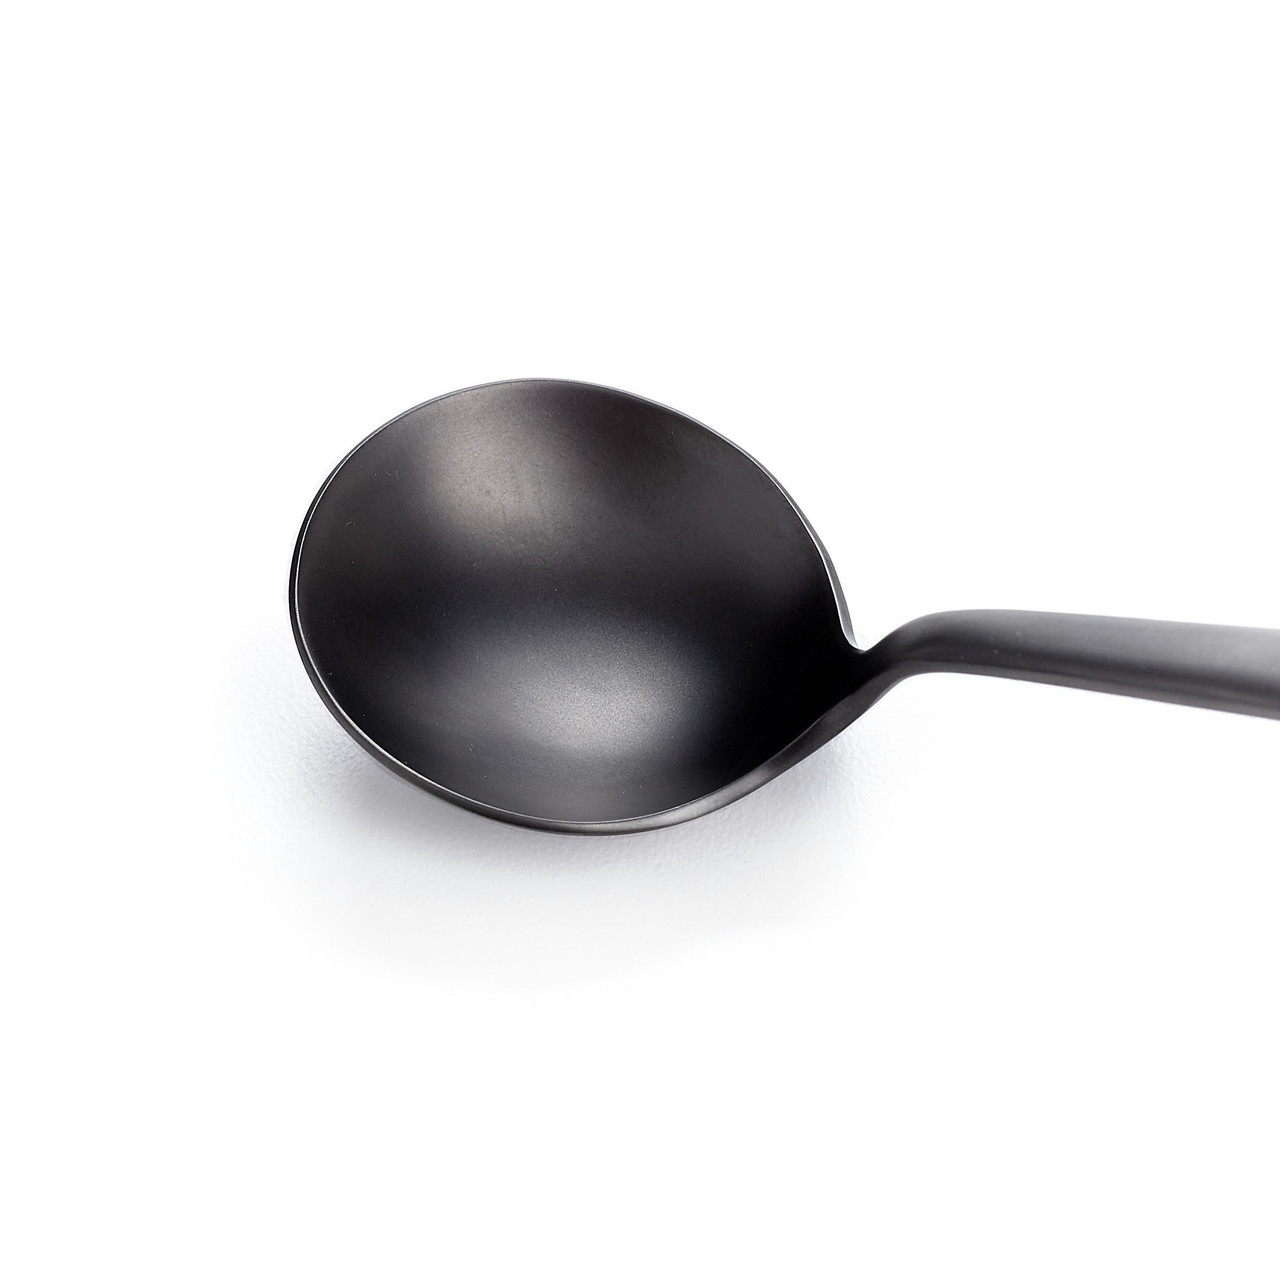 Rattleware Cupping Spoon